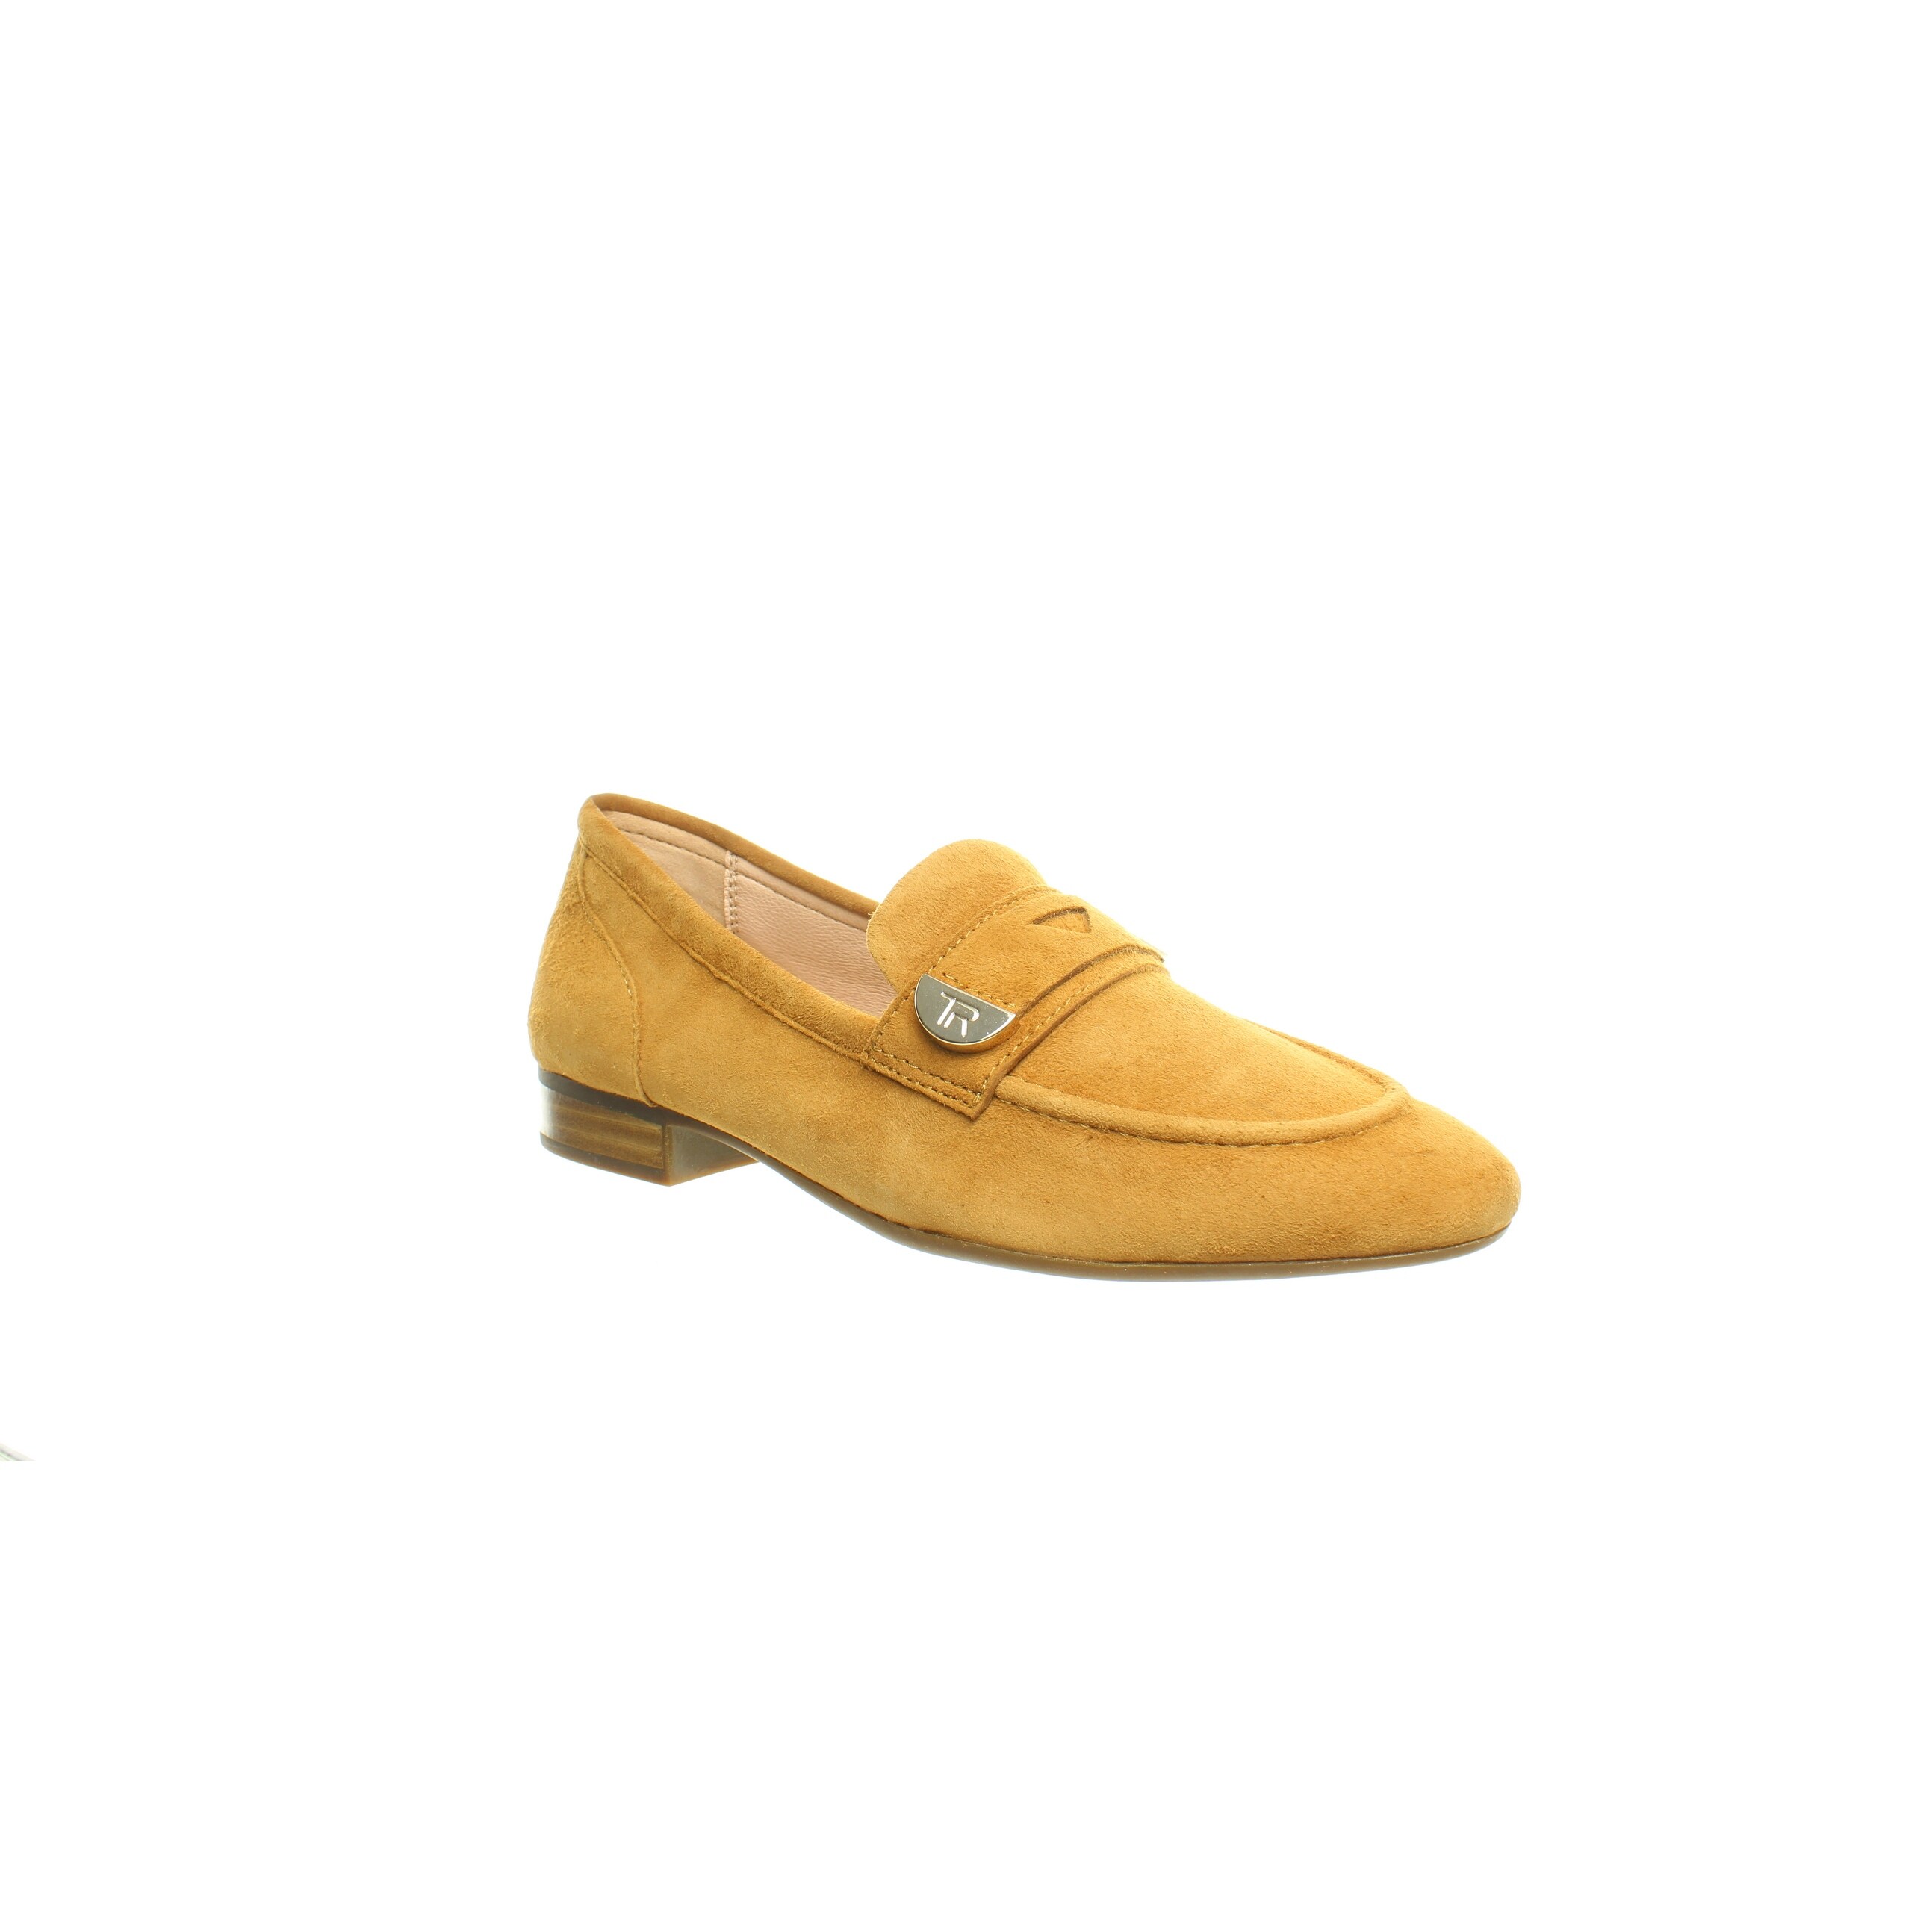 loafers size 5 womens